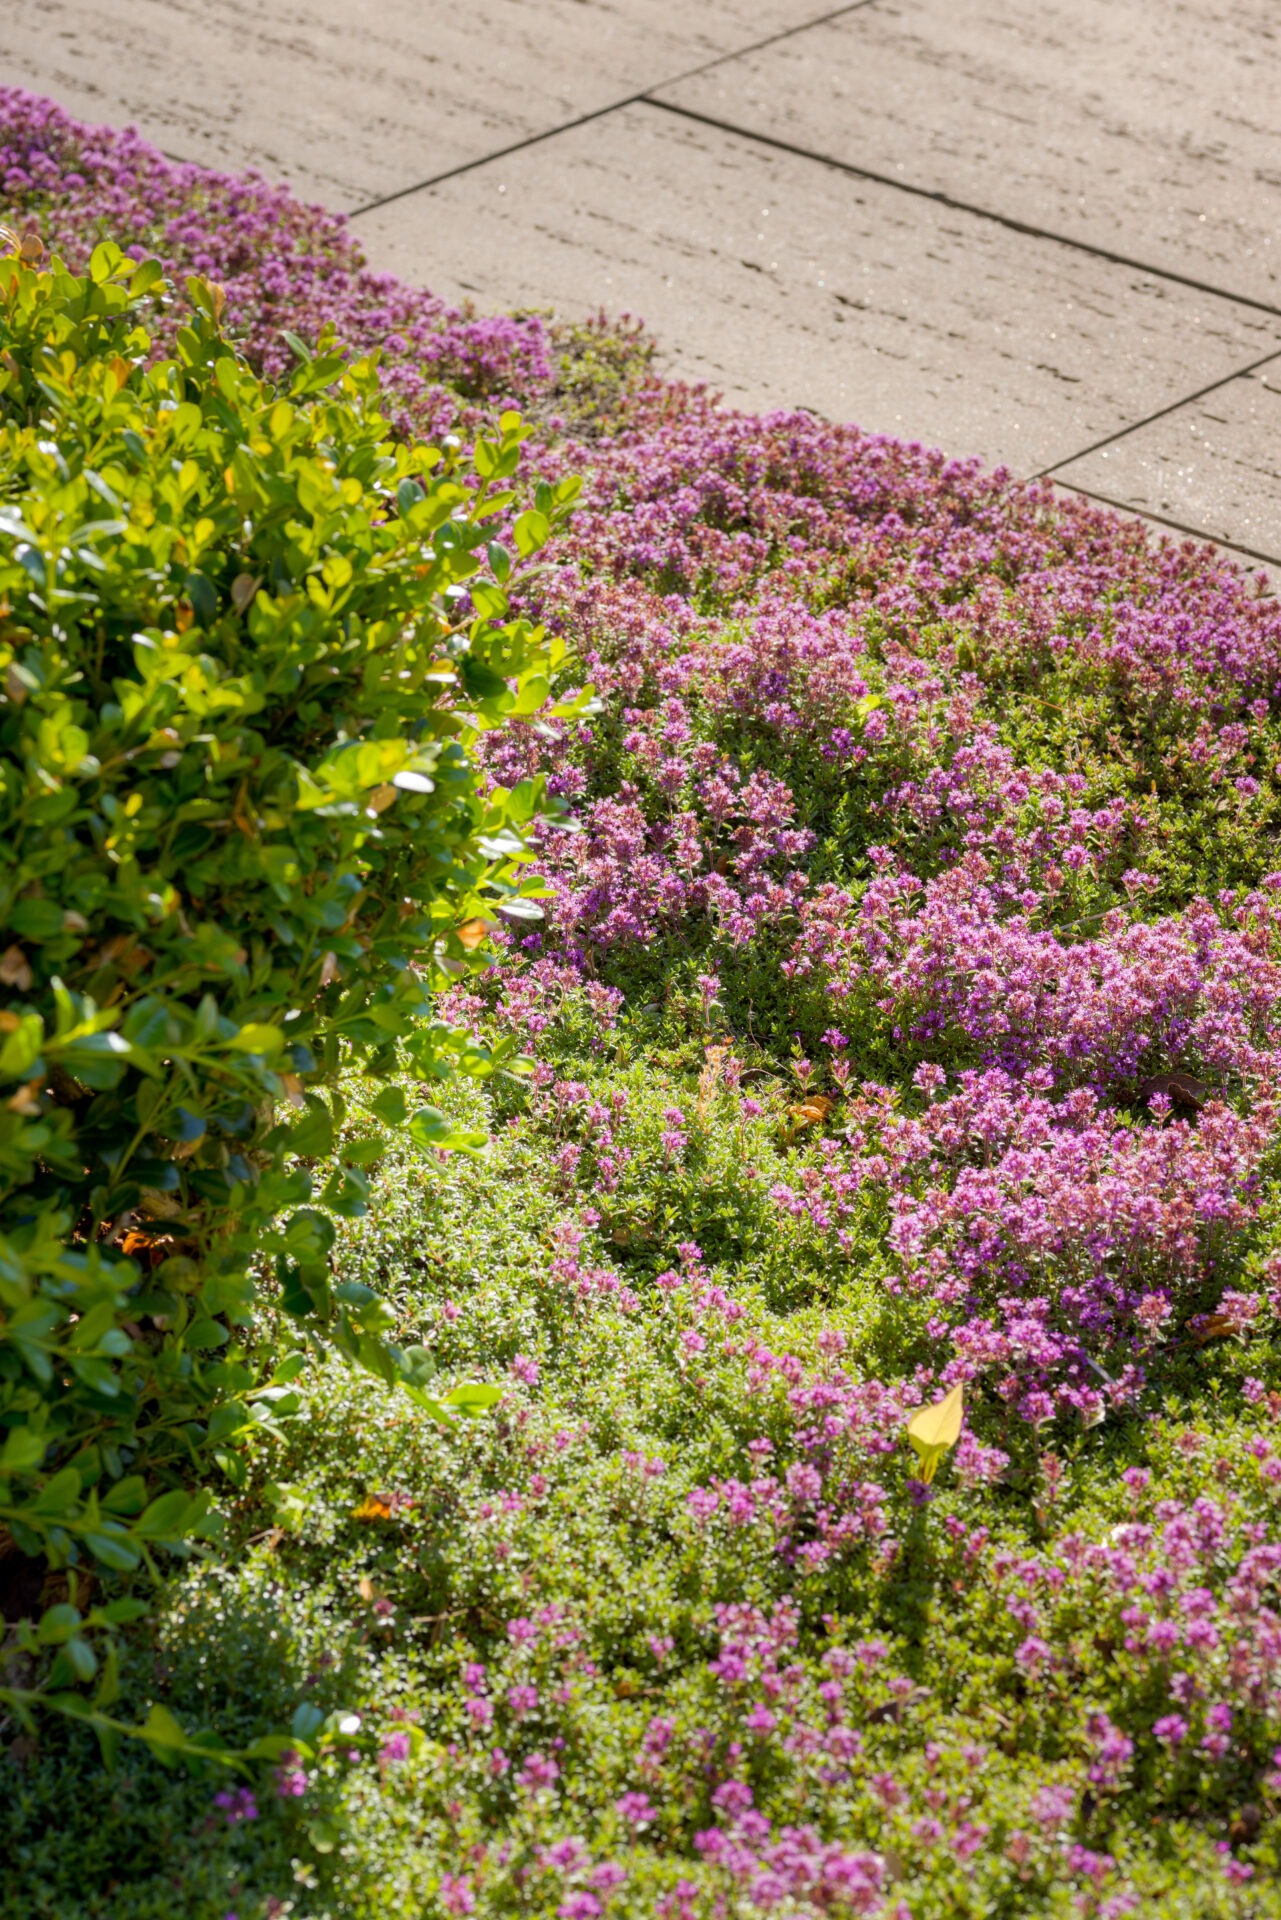 This image displays a vibrant garden with purple flowers, lush green leaves, and intersecting concrete walkways under bright sunlight.